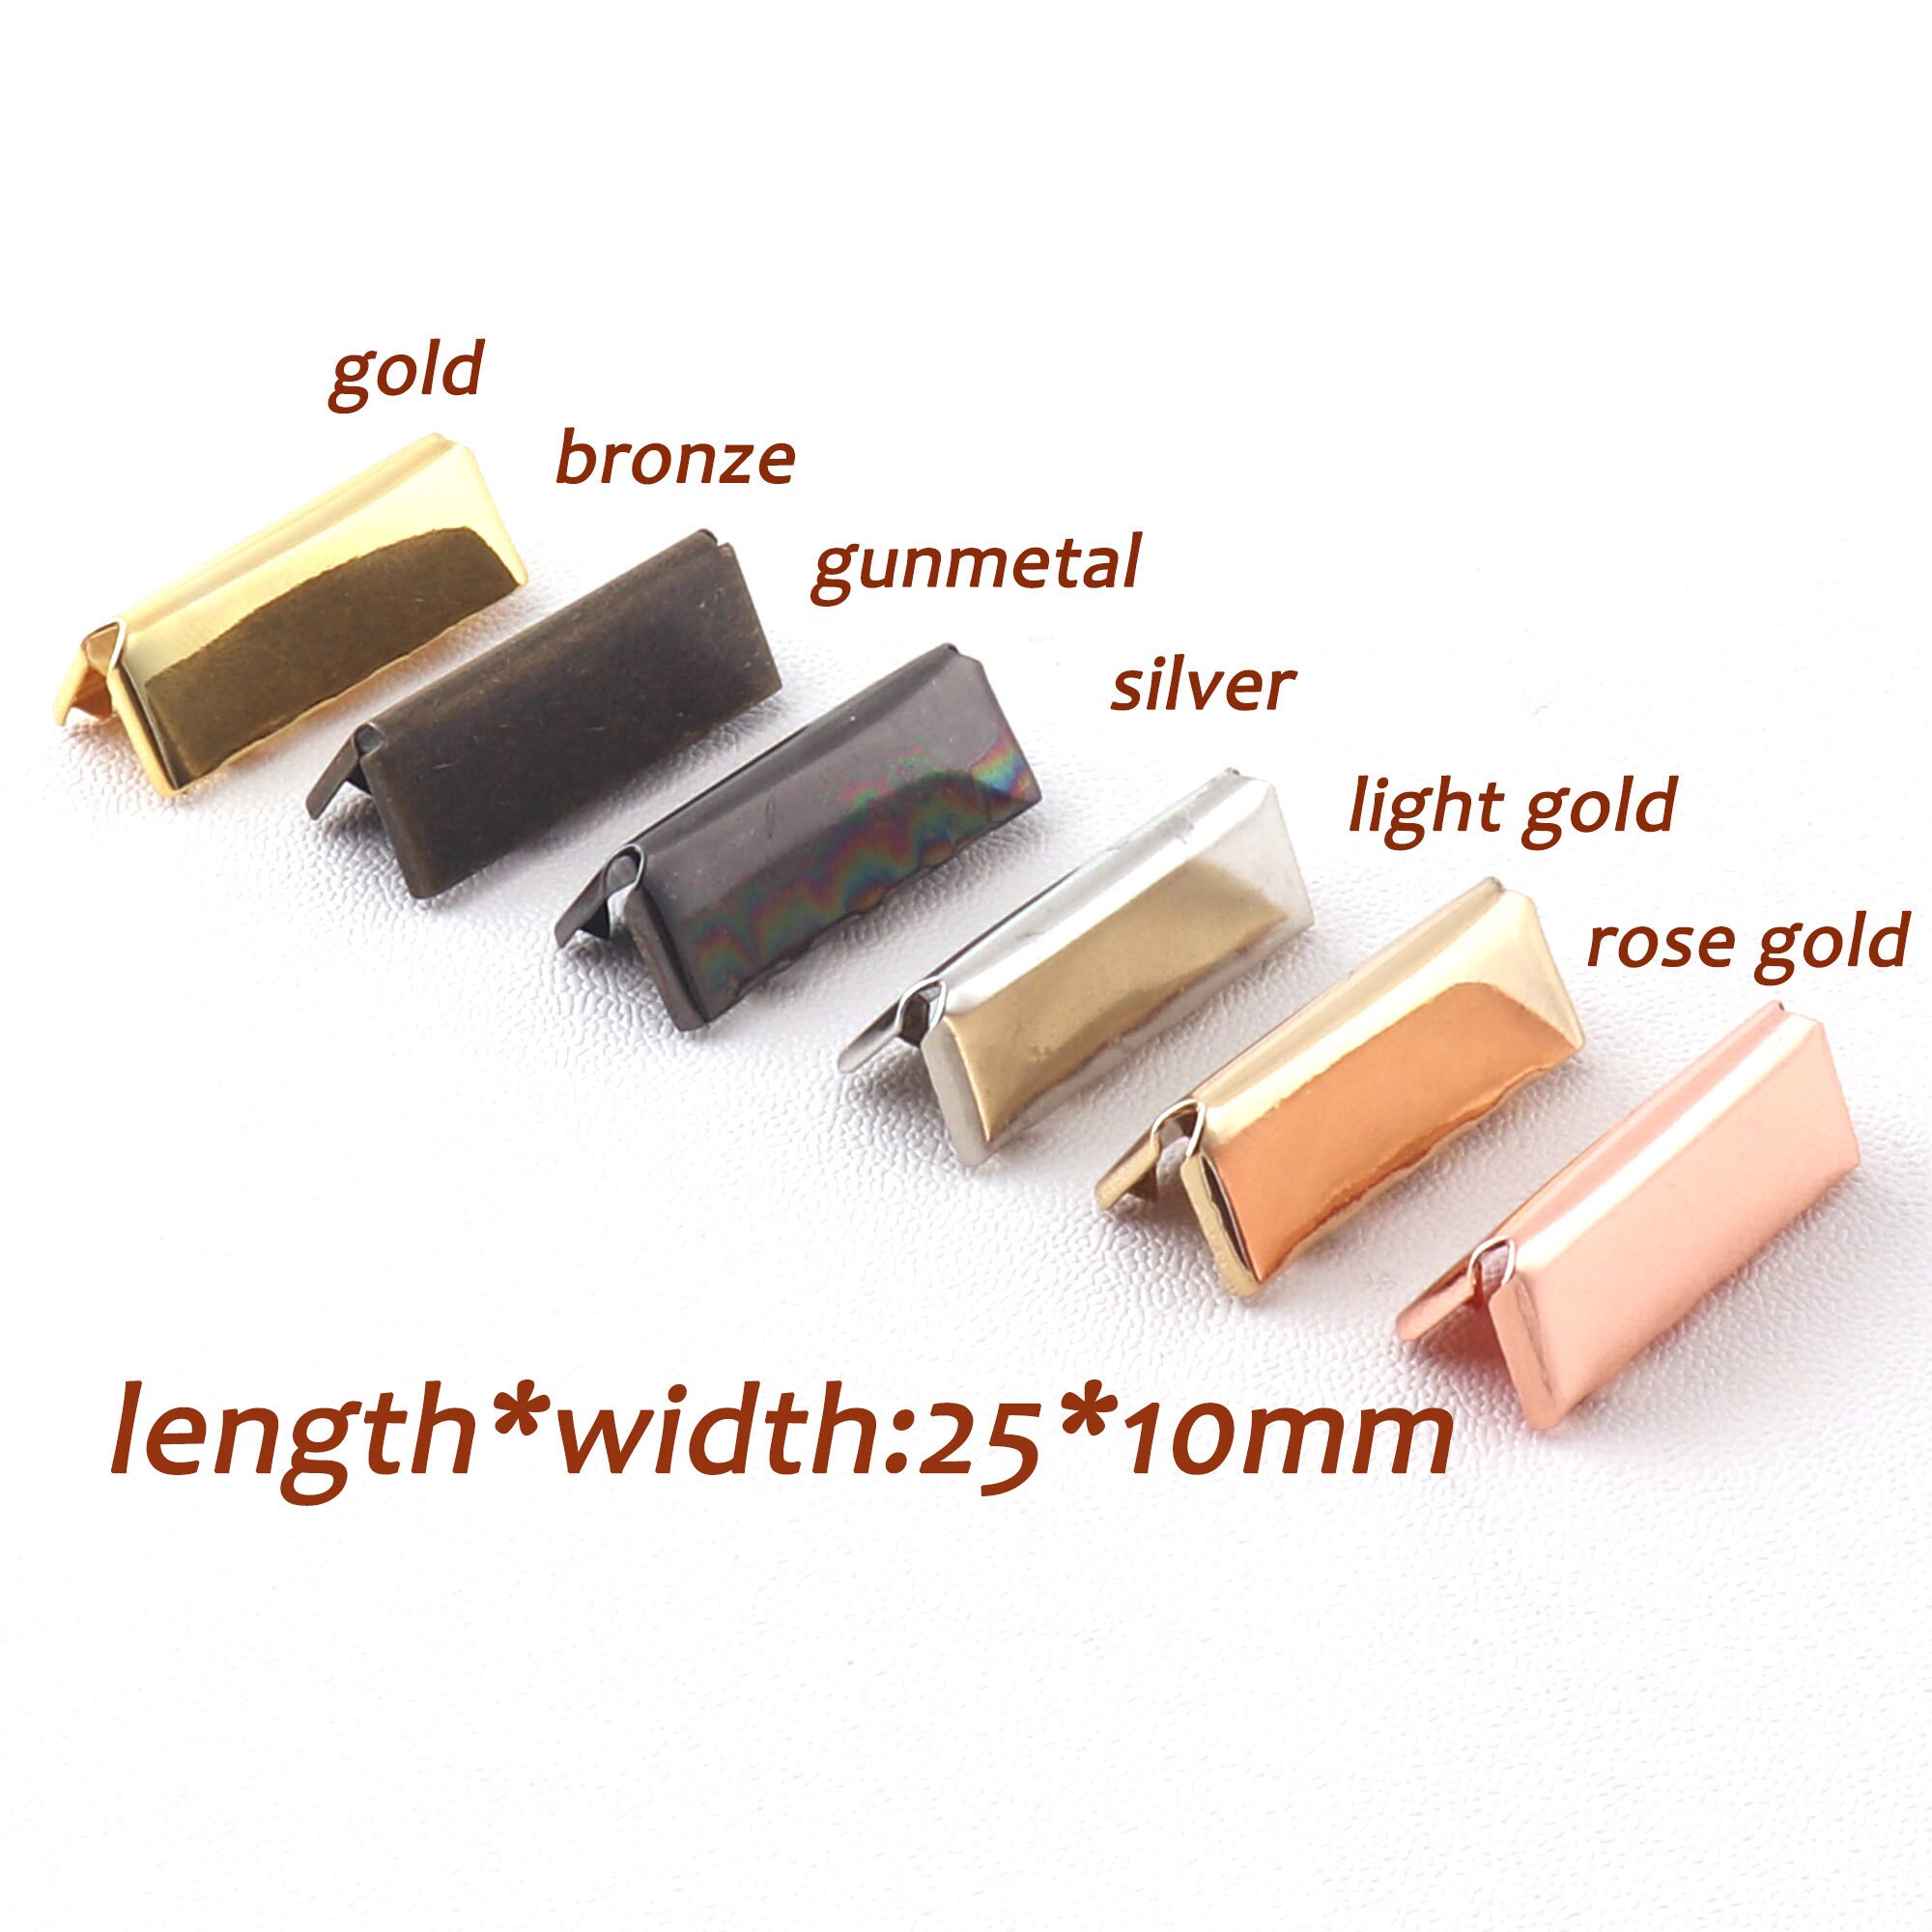 Ribbon Crimps for Jewelry Making, Ribbon Clamps, Fold Over Cord Ends,  Jewelry Finding Kit for Bracelets, Bookmarks; 5 Colors 3 X 6mm 